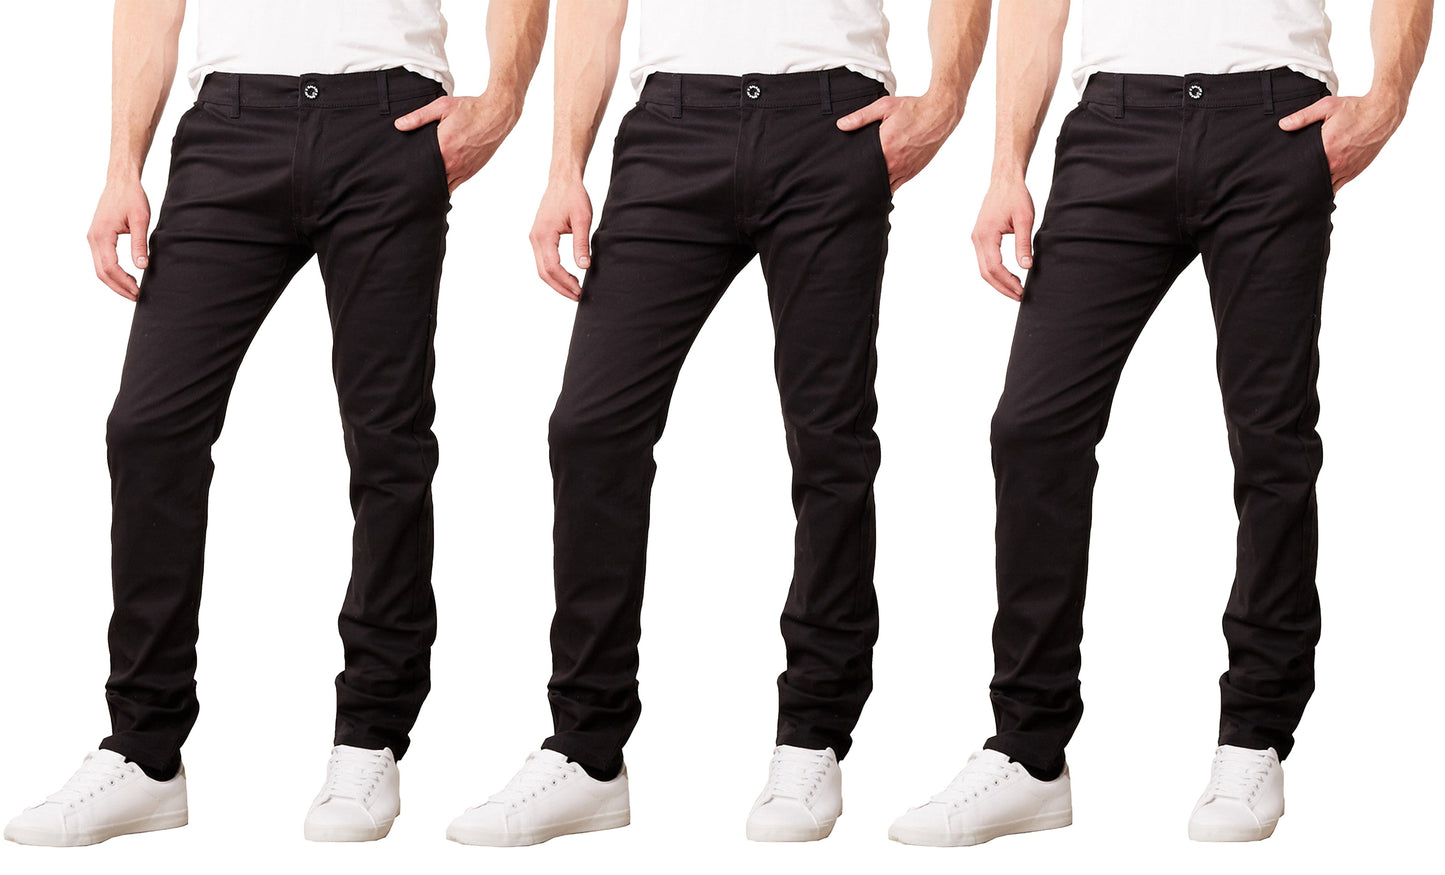 Men's Slim Fit Cotton Stretch Chino Pants (3-Pack)